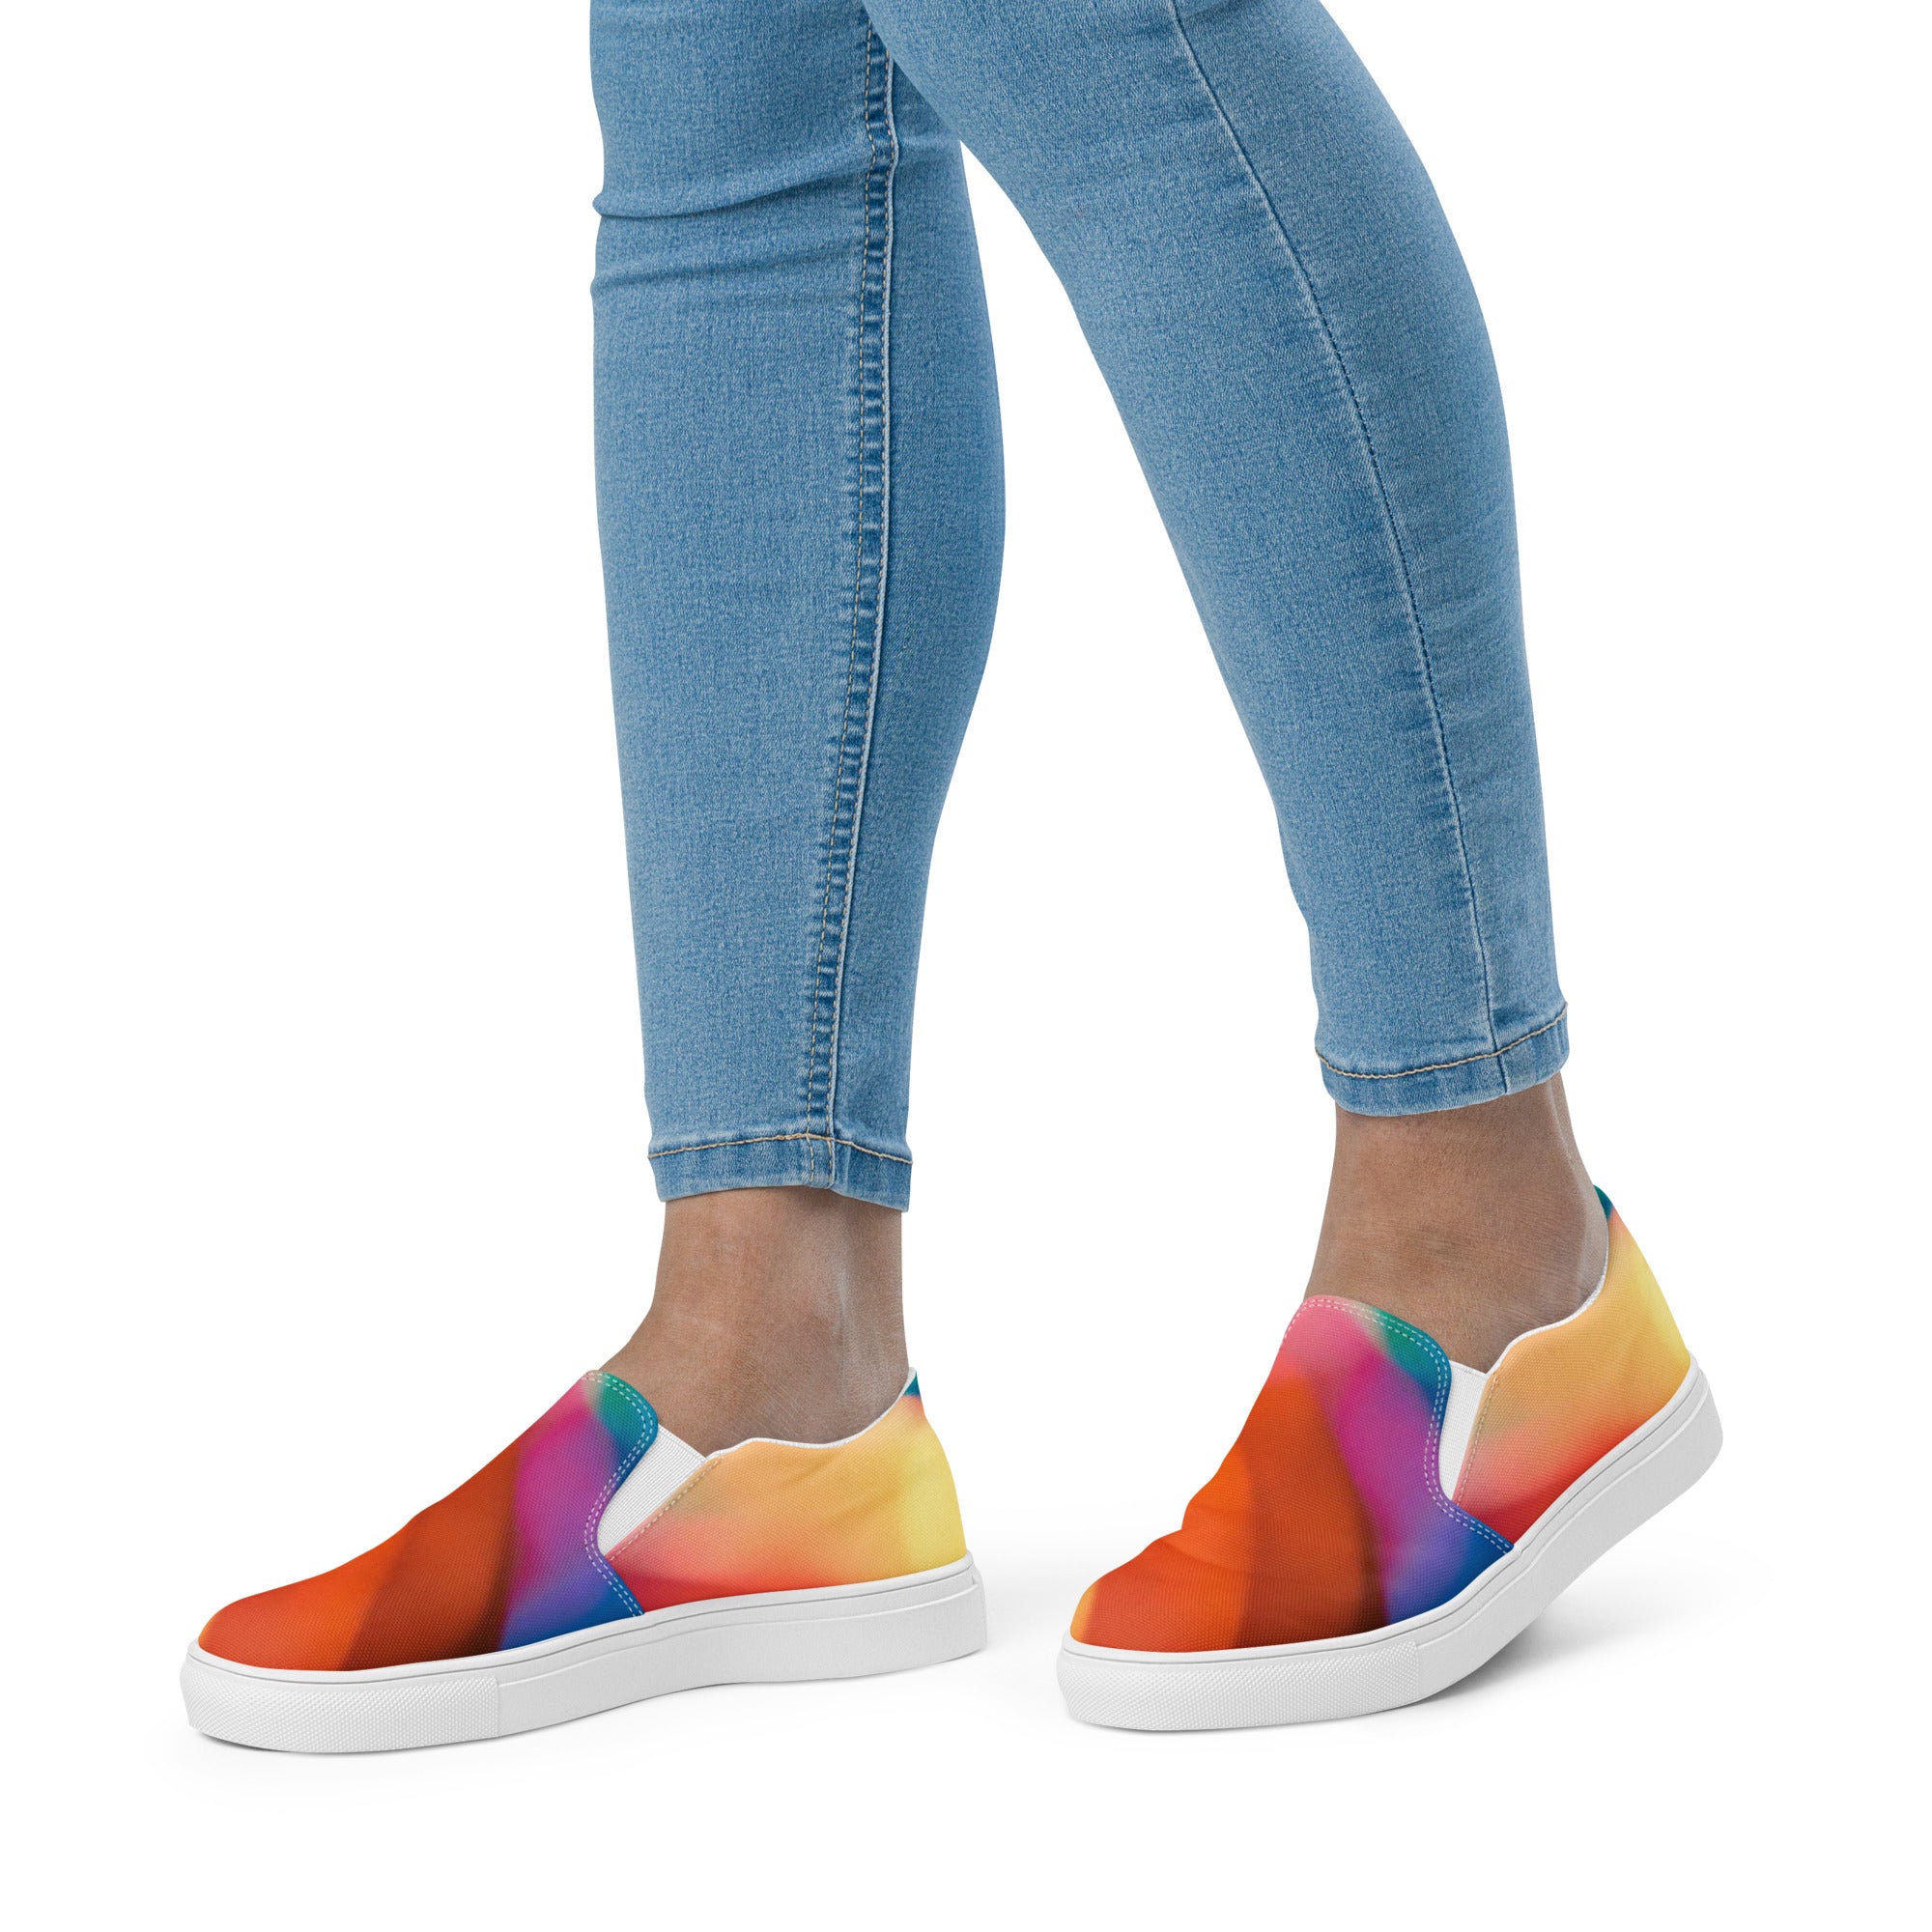 Women’s slip-on canvas shoes for yoga - Handmade - Personal Hour for Yoga and Meditations 